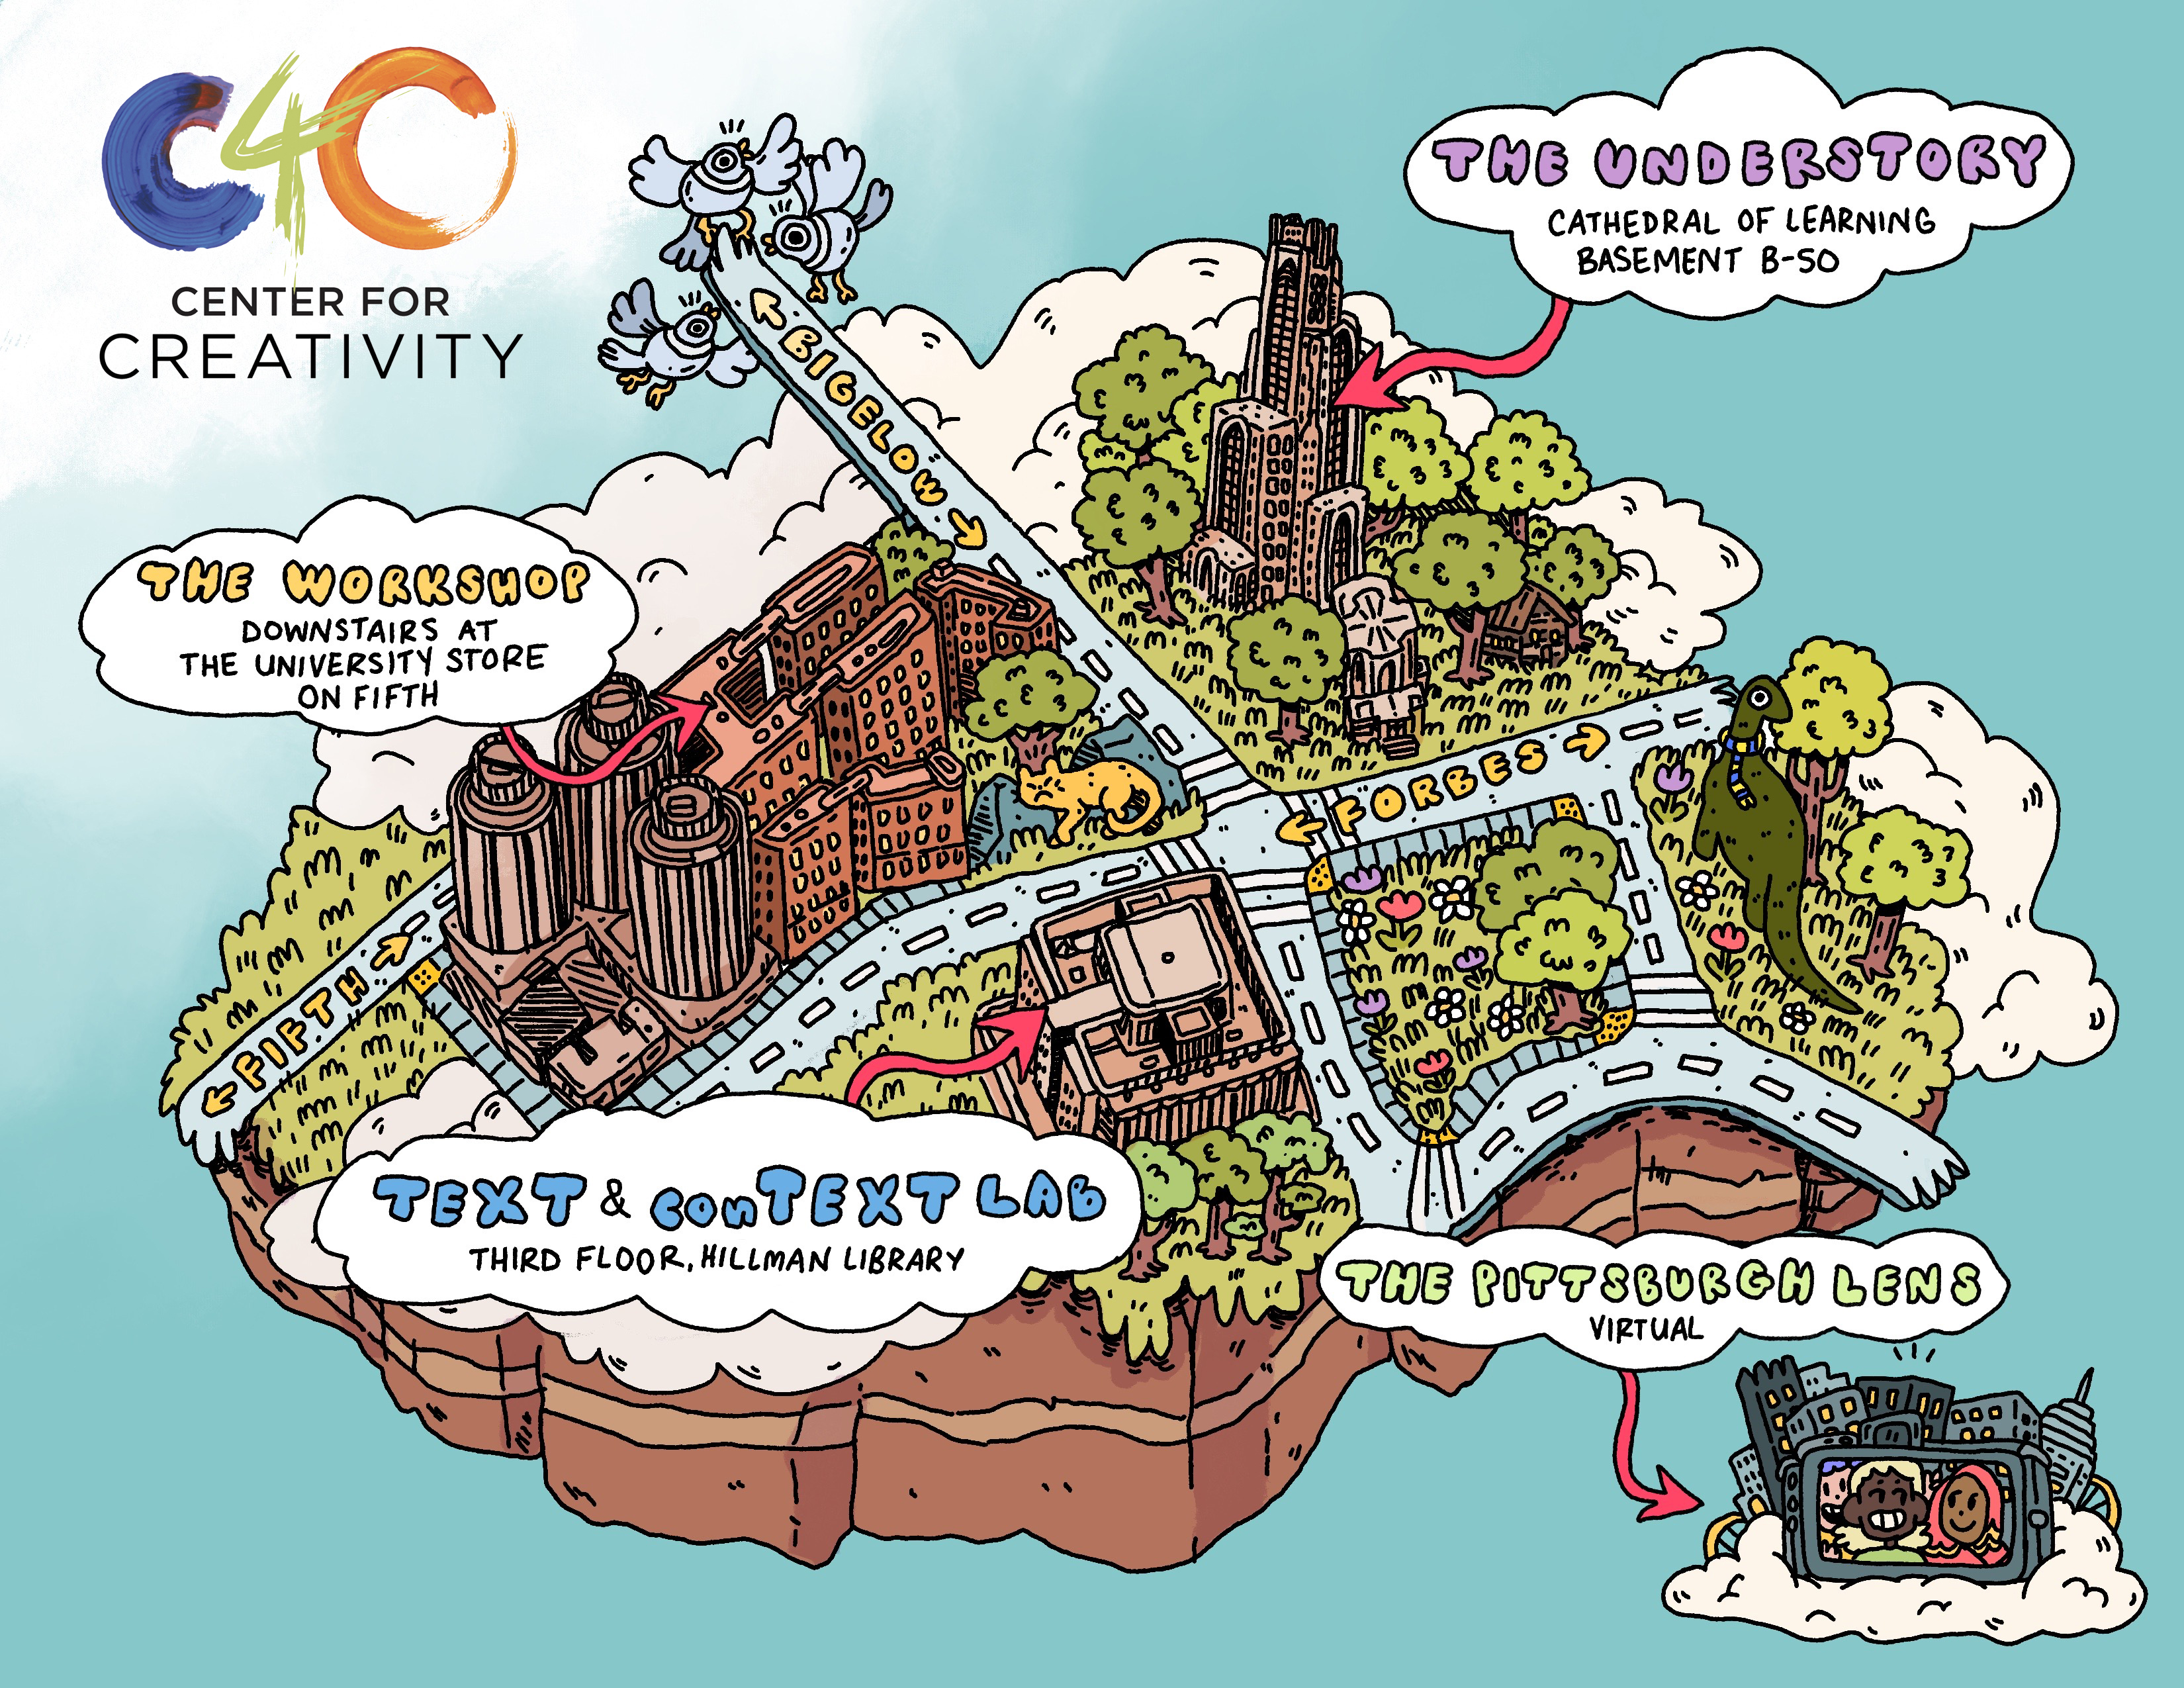 Map of Center for Creativity Locations